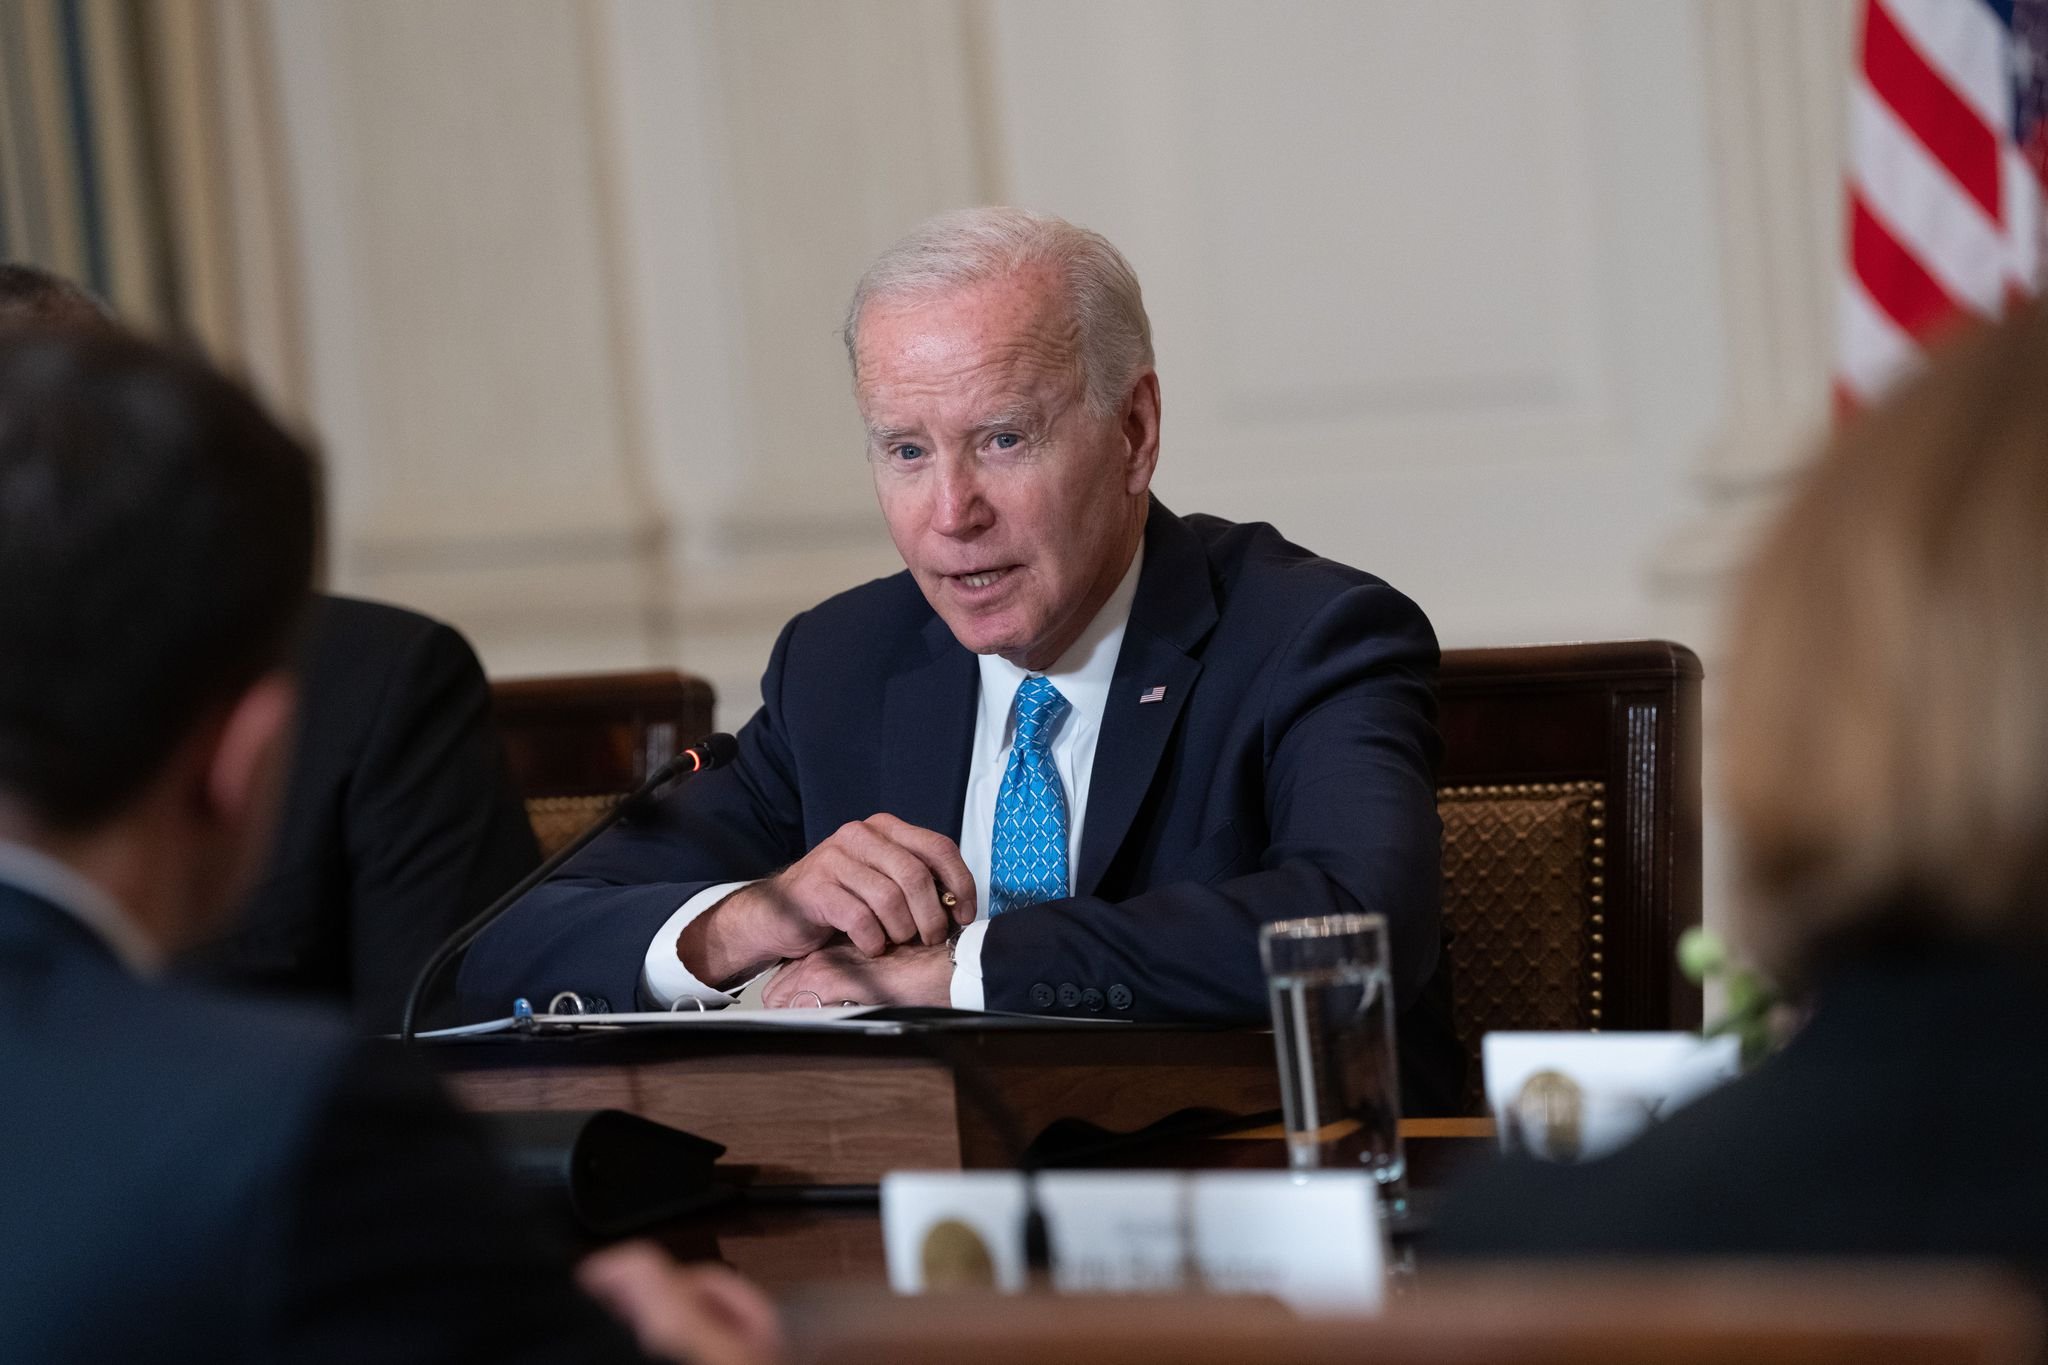 Biden faces pressure to waive restriction as ship idles off Puerto Rico coast